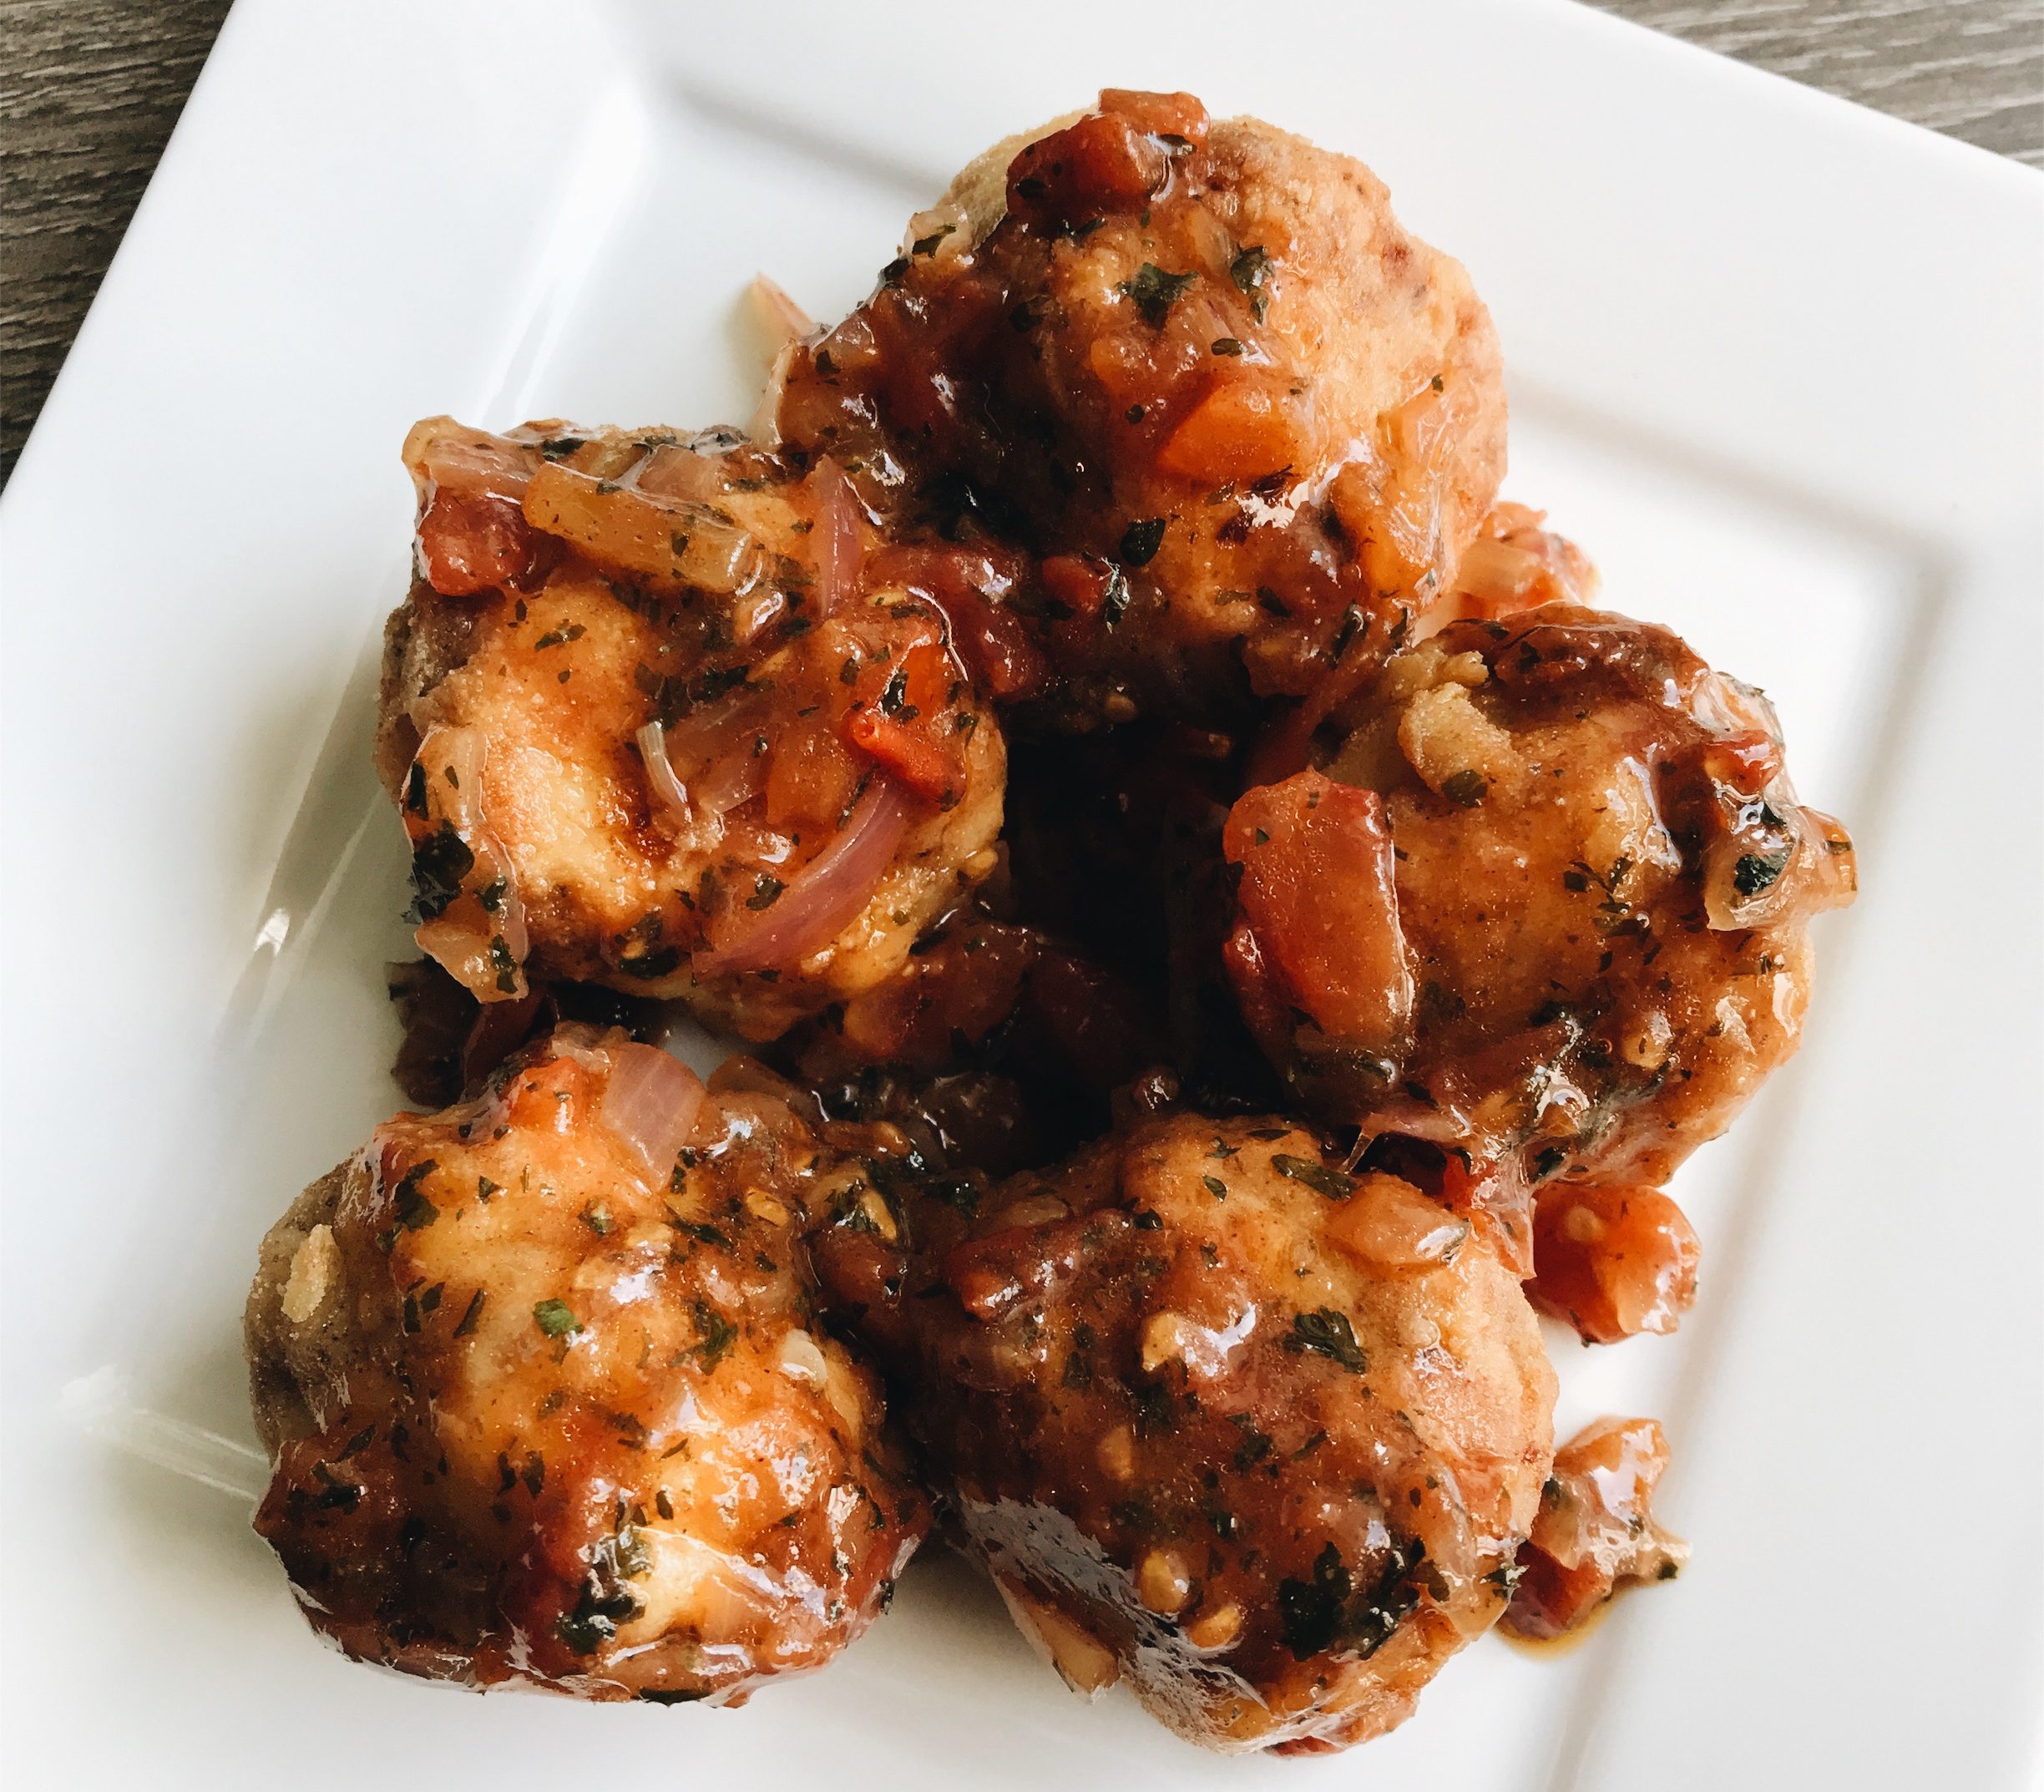 Travel Noire Eats And Recipes: Senegalese Fish Balls With Tomato Sauce